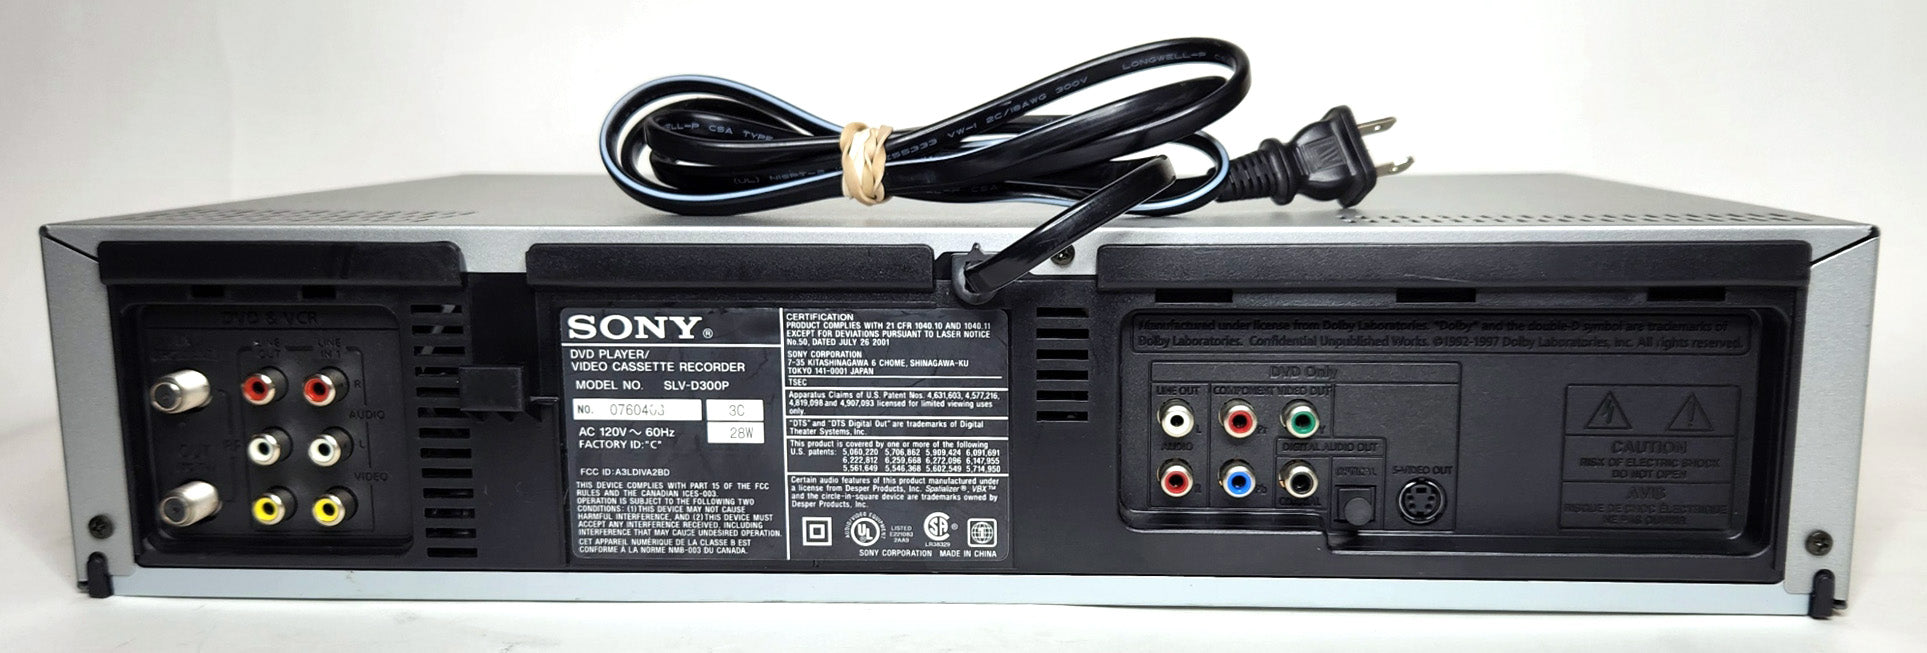 Sony SLV-D300P VCR/DVD Player Combo - Rear